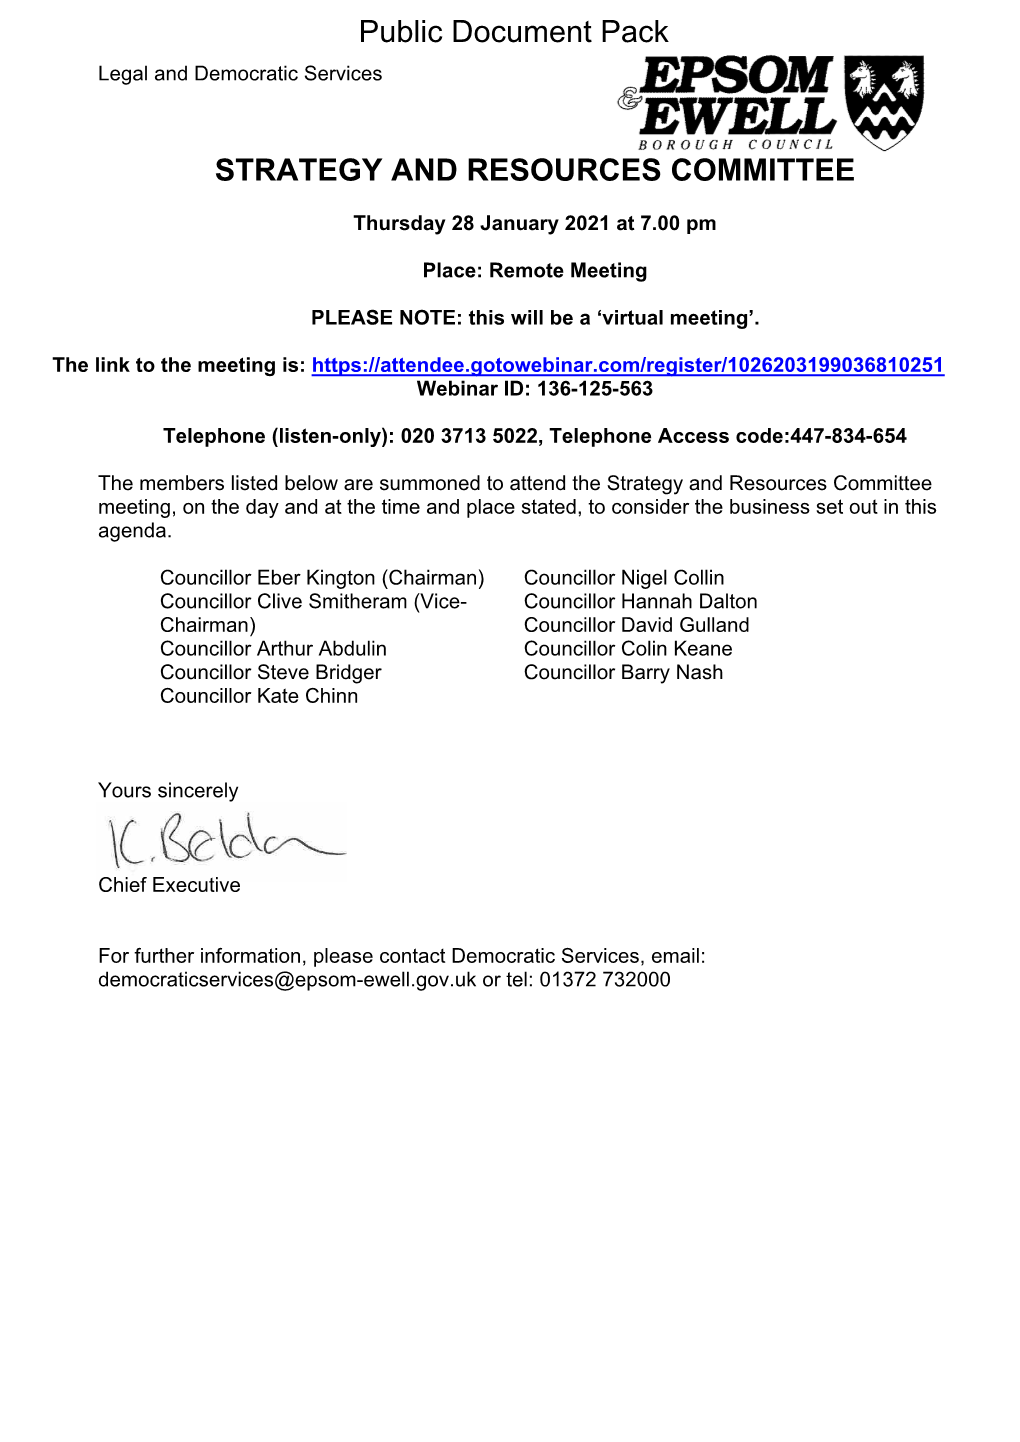 Agenda Document for Strategy and Resources Committee, 28/01/2021